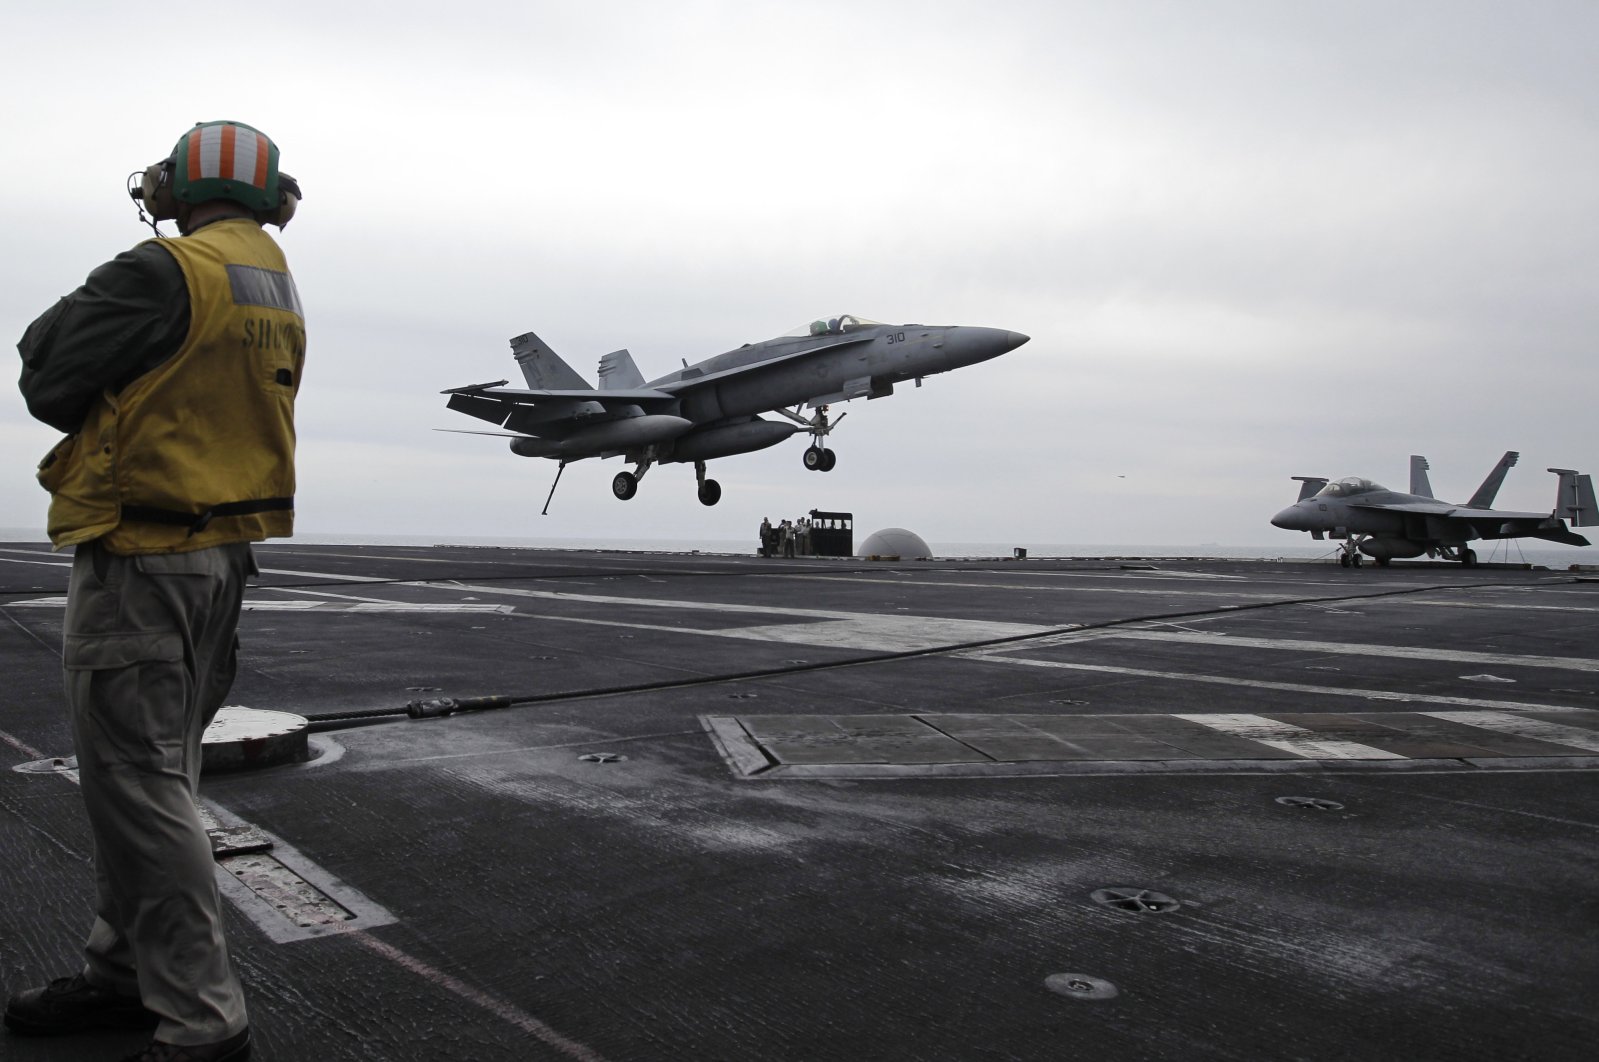 U.S. fighter jet lands on the USS Abraham Lincoln aircraft carrier during exercises in the Persian Gulf., U.S., Feb. 13, 2012. (AP Photo)